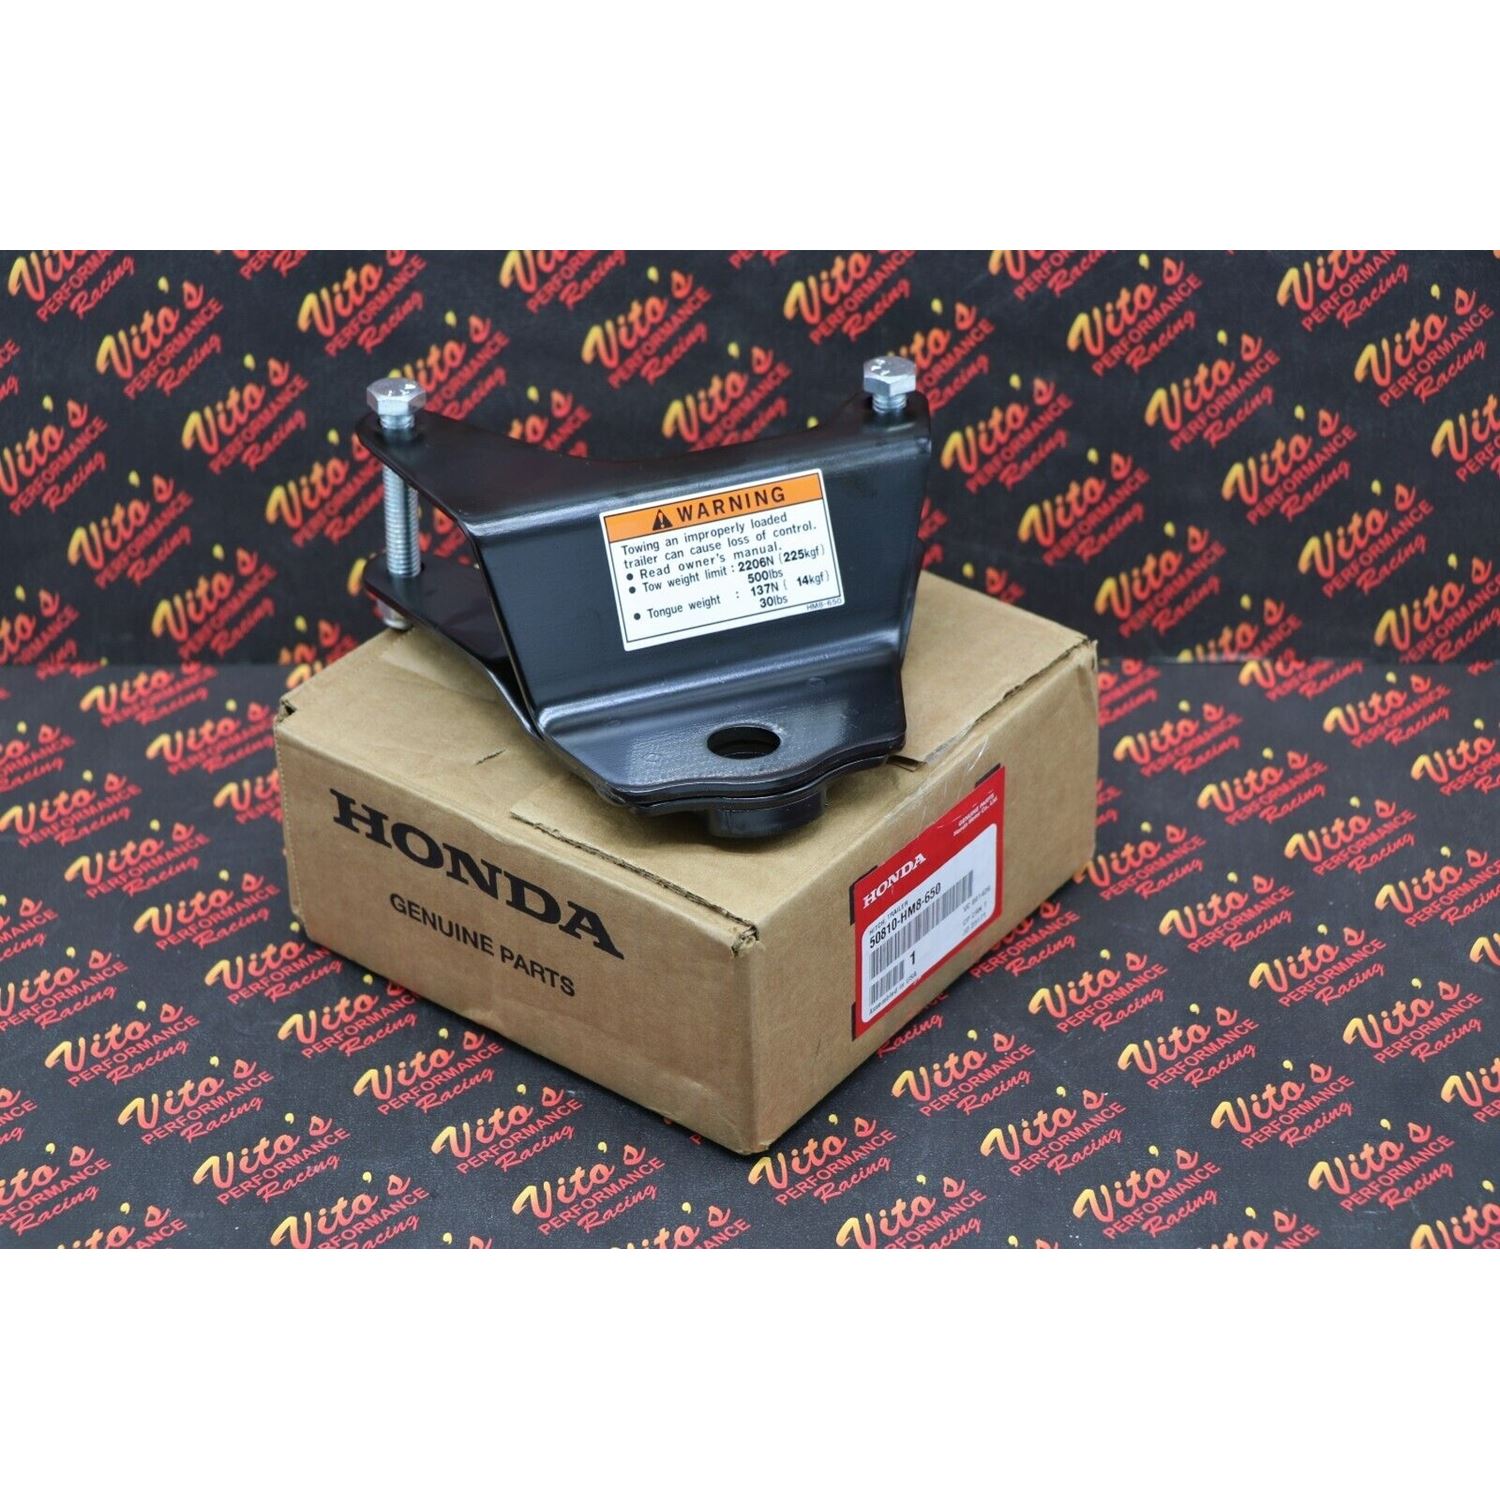 NEW OEM HONDA TRAILER HITCH for TRX 250 RECON 1997